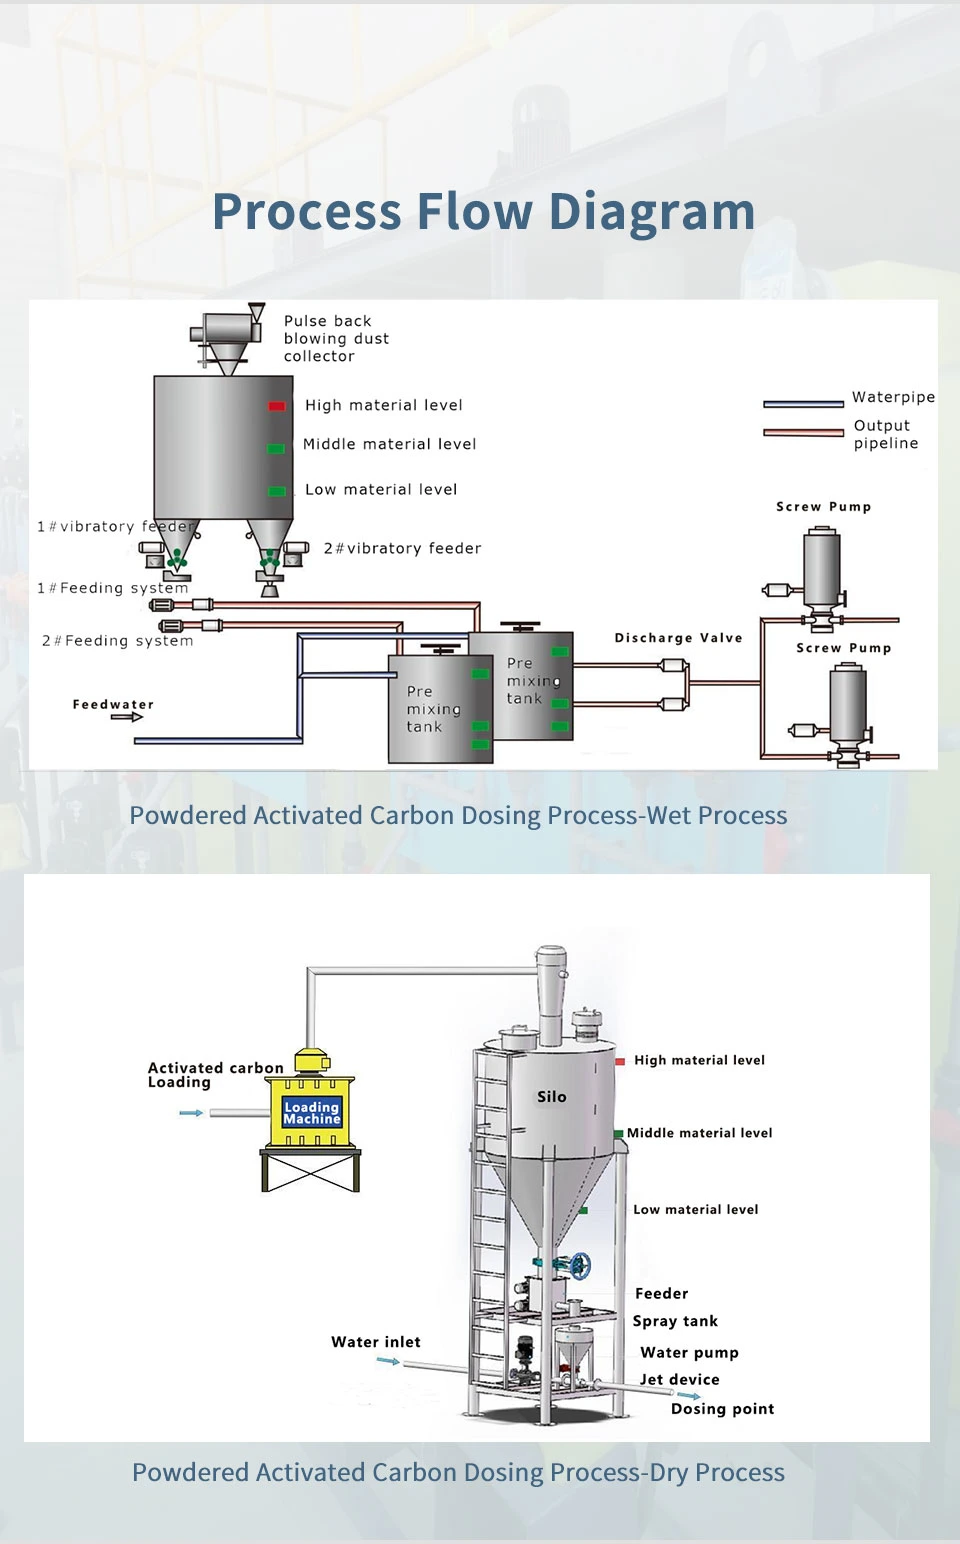 Efficient Powdered Activated Carbon Dosing System for Water Treatment and Purification